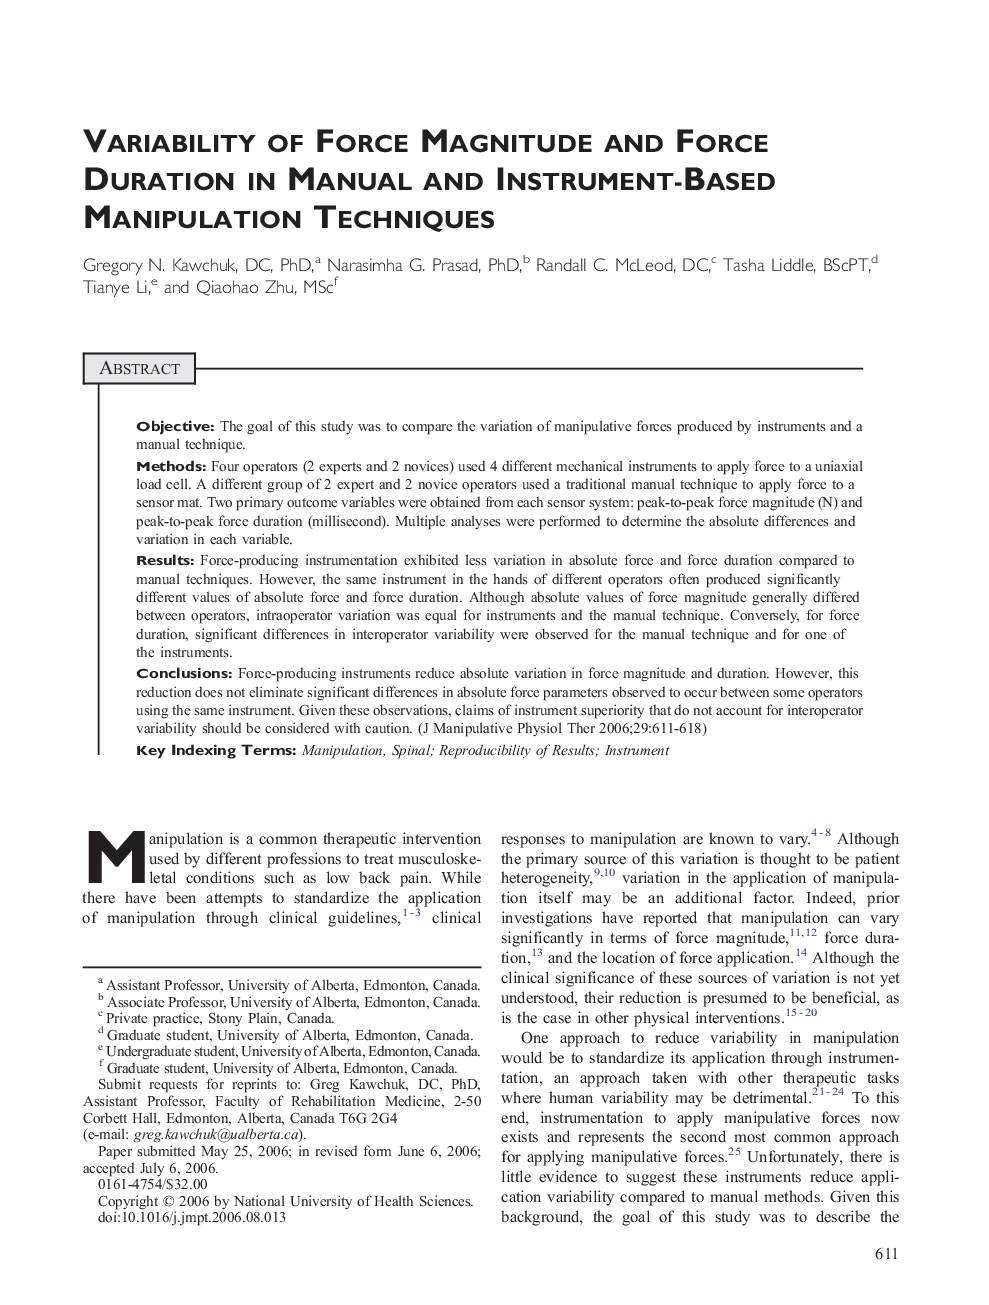 Variability of Force Magnitude and Force Duration in Manual and Instrument-Based Manipulation Techniques